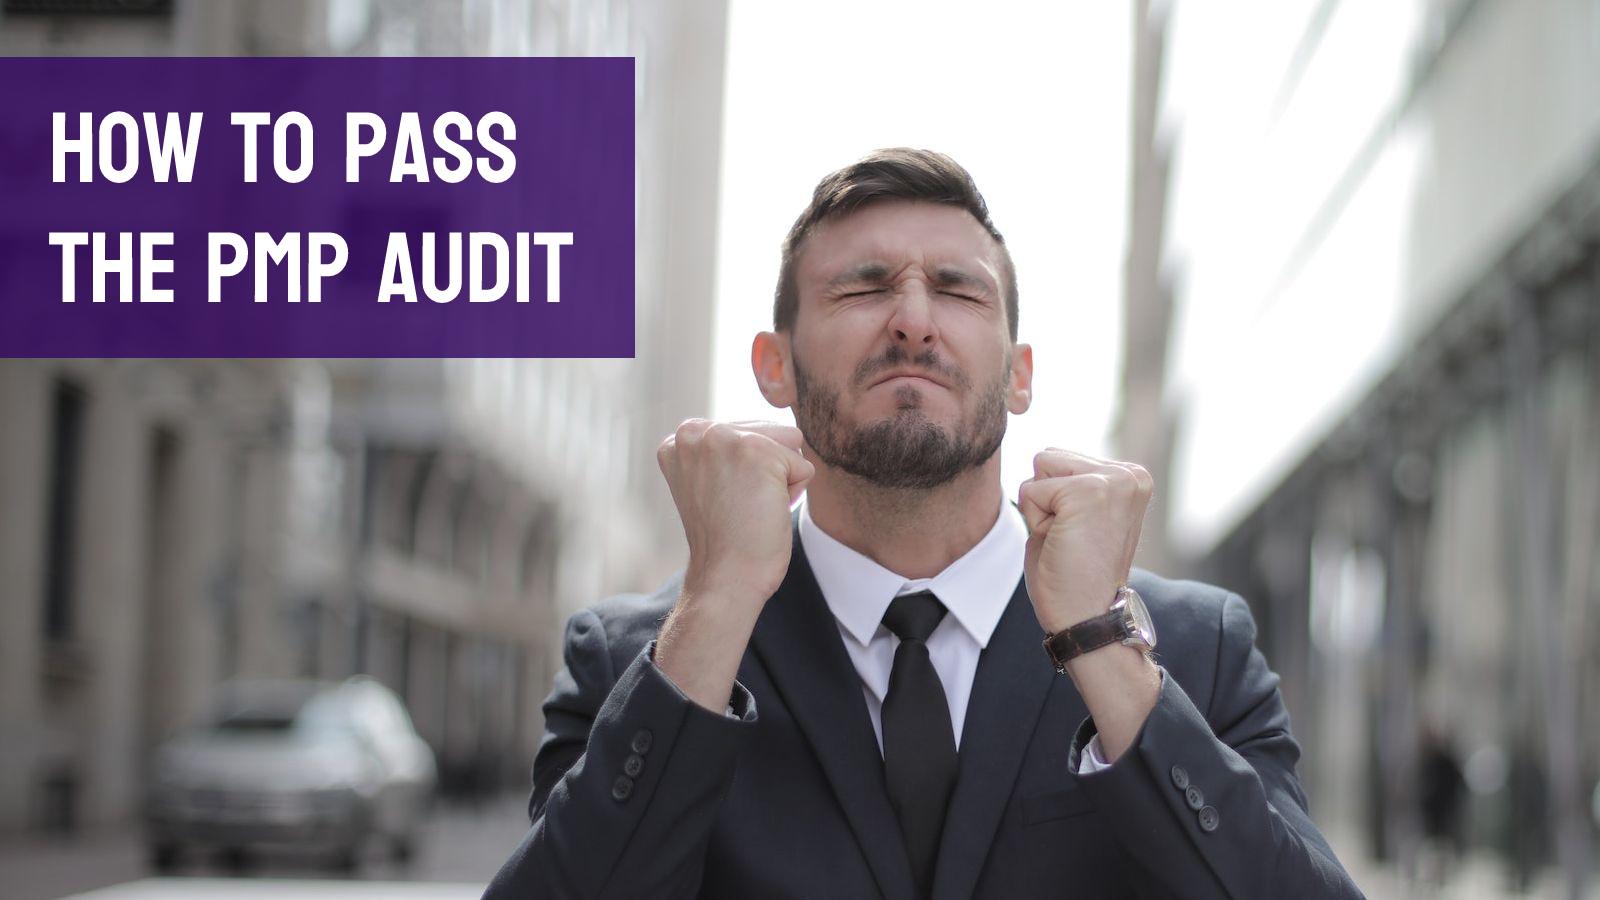 Why does PMI audit applicants? Which documents do you need to present for the audit?